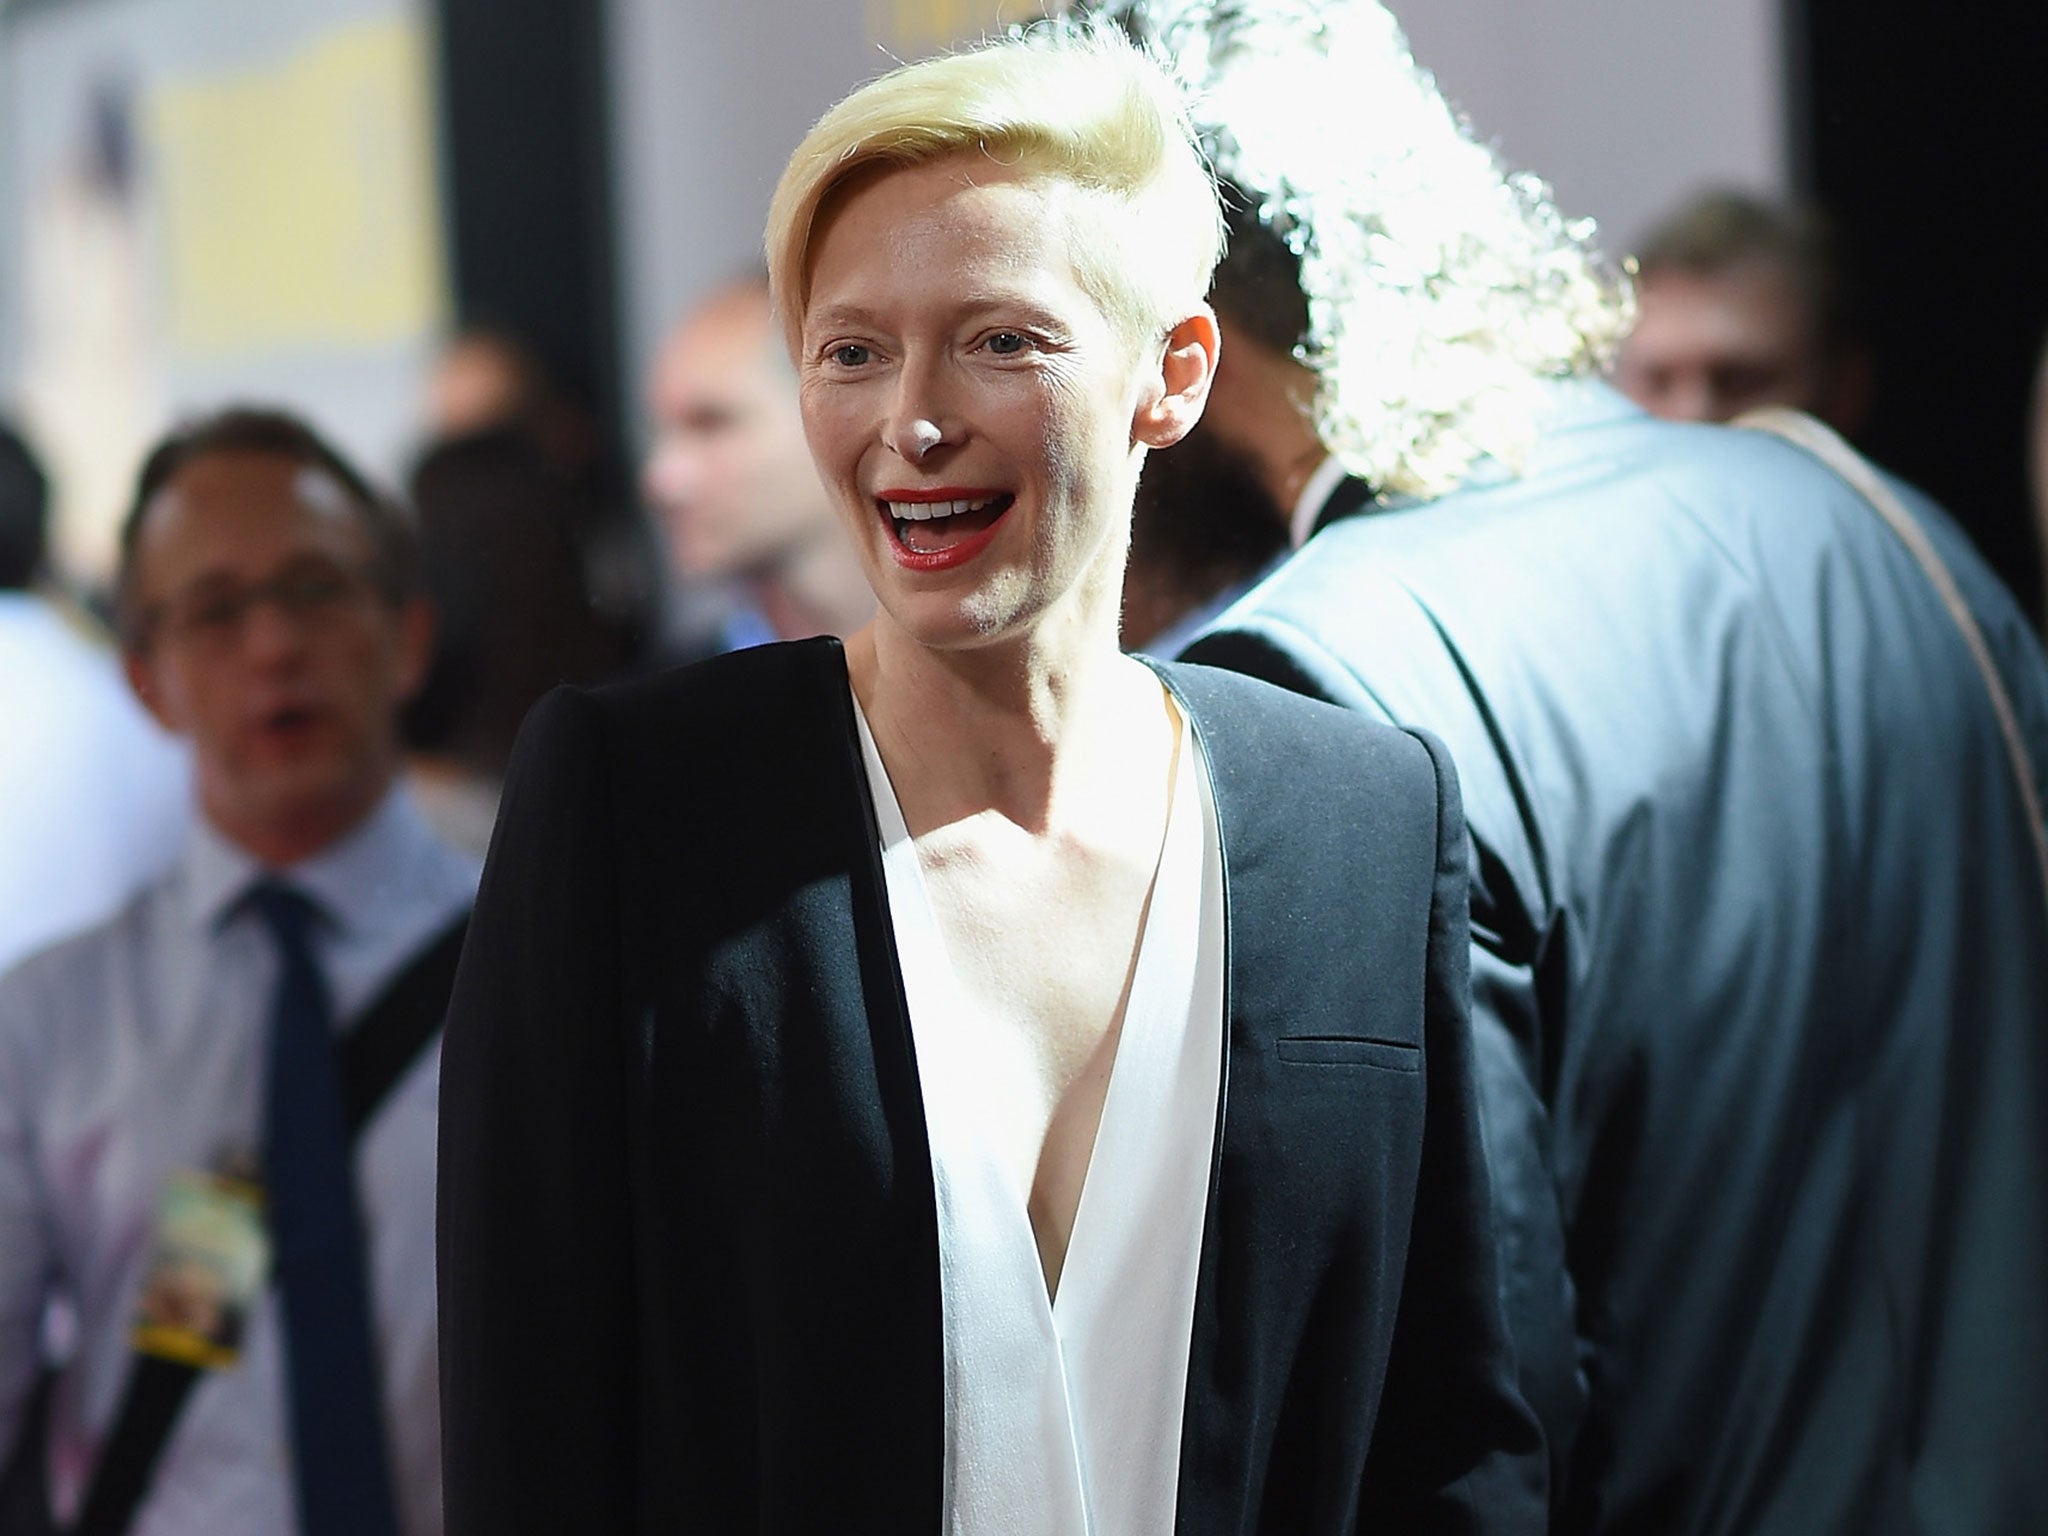 Tilda Swinton will play The Ancient One in Doctor Strange